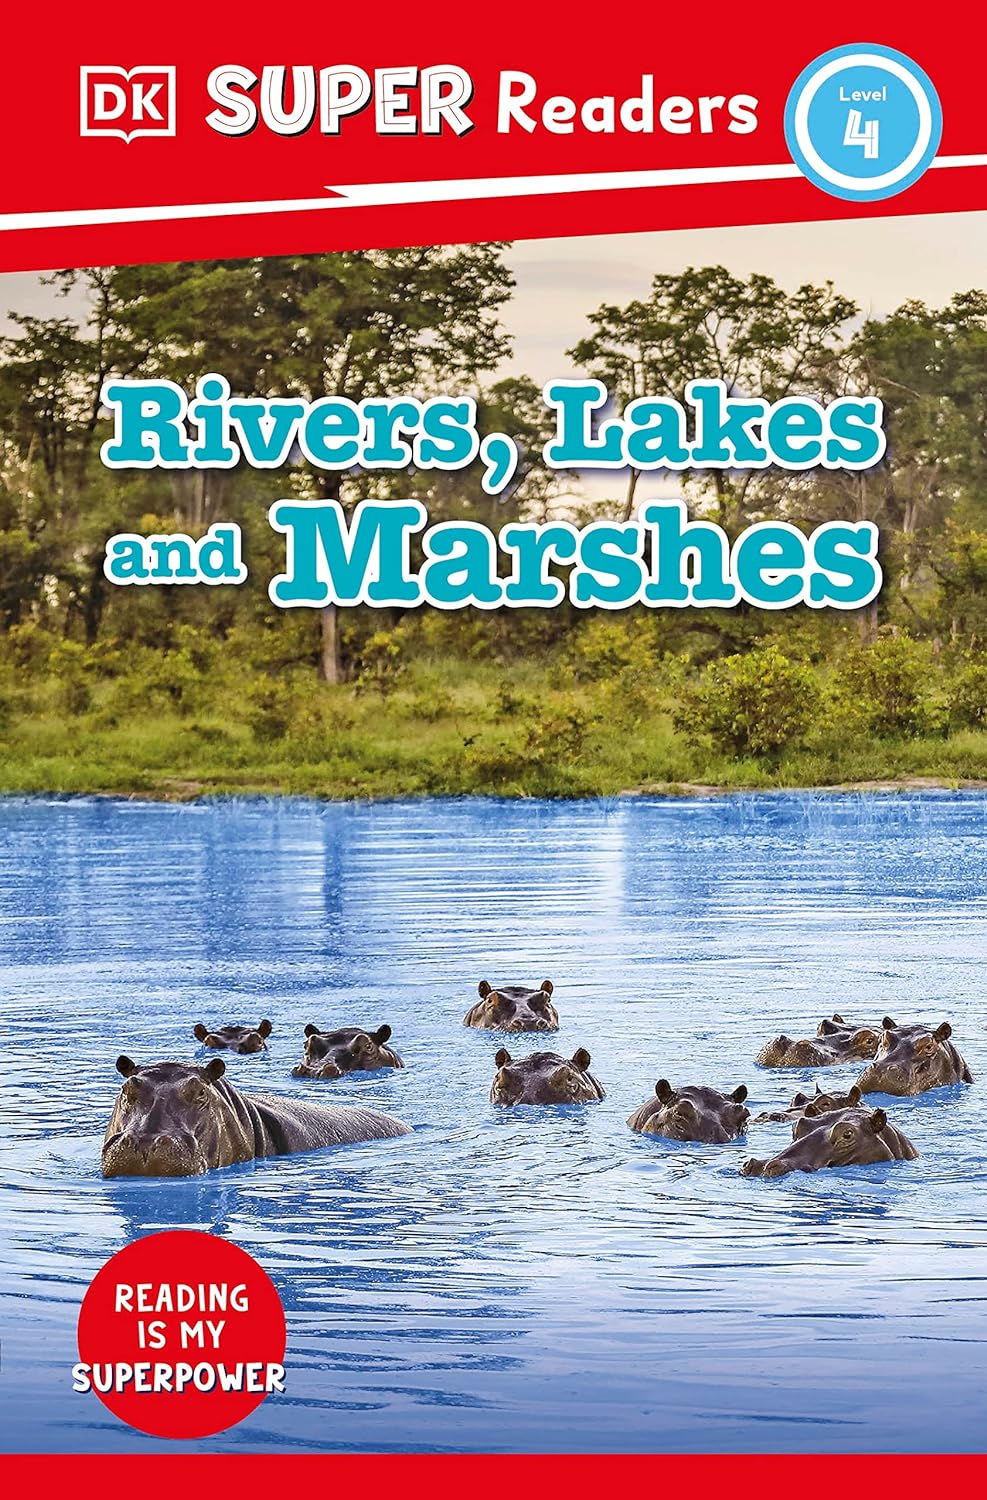 DK Super Readers Level 4 : Rivers, Lakes and Marshes